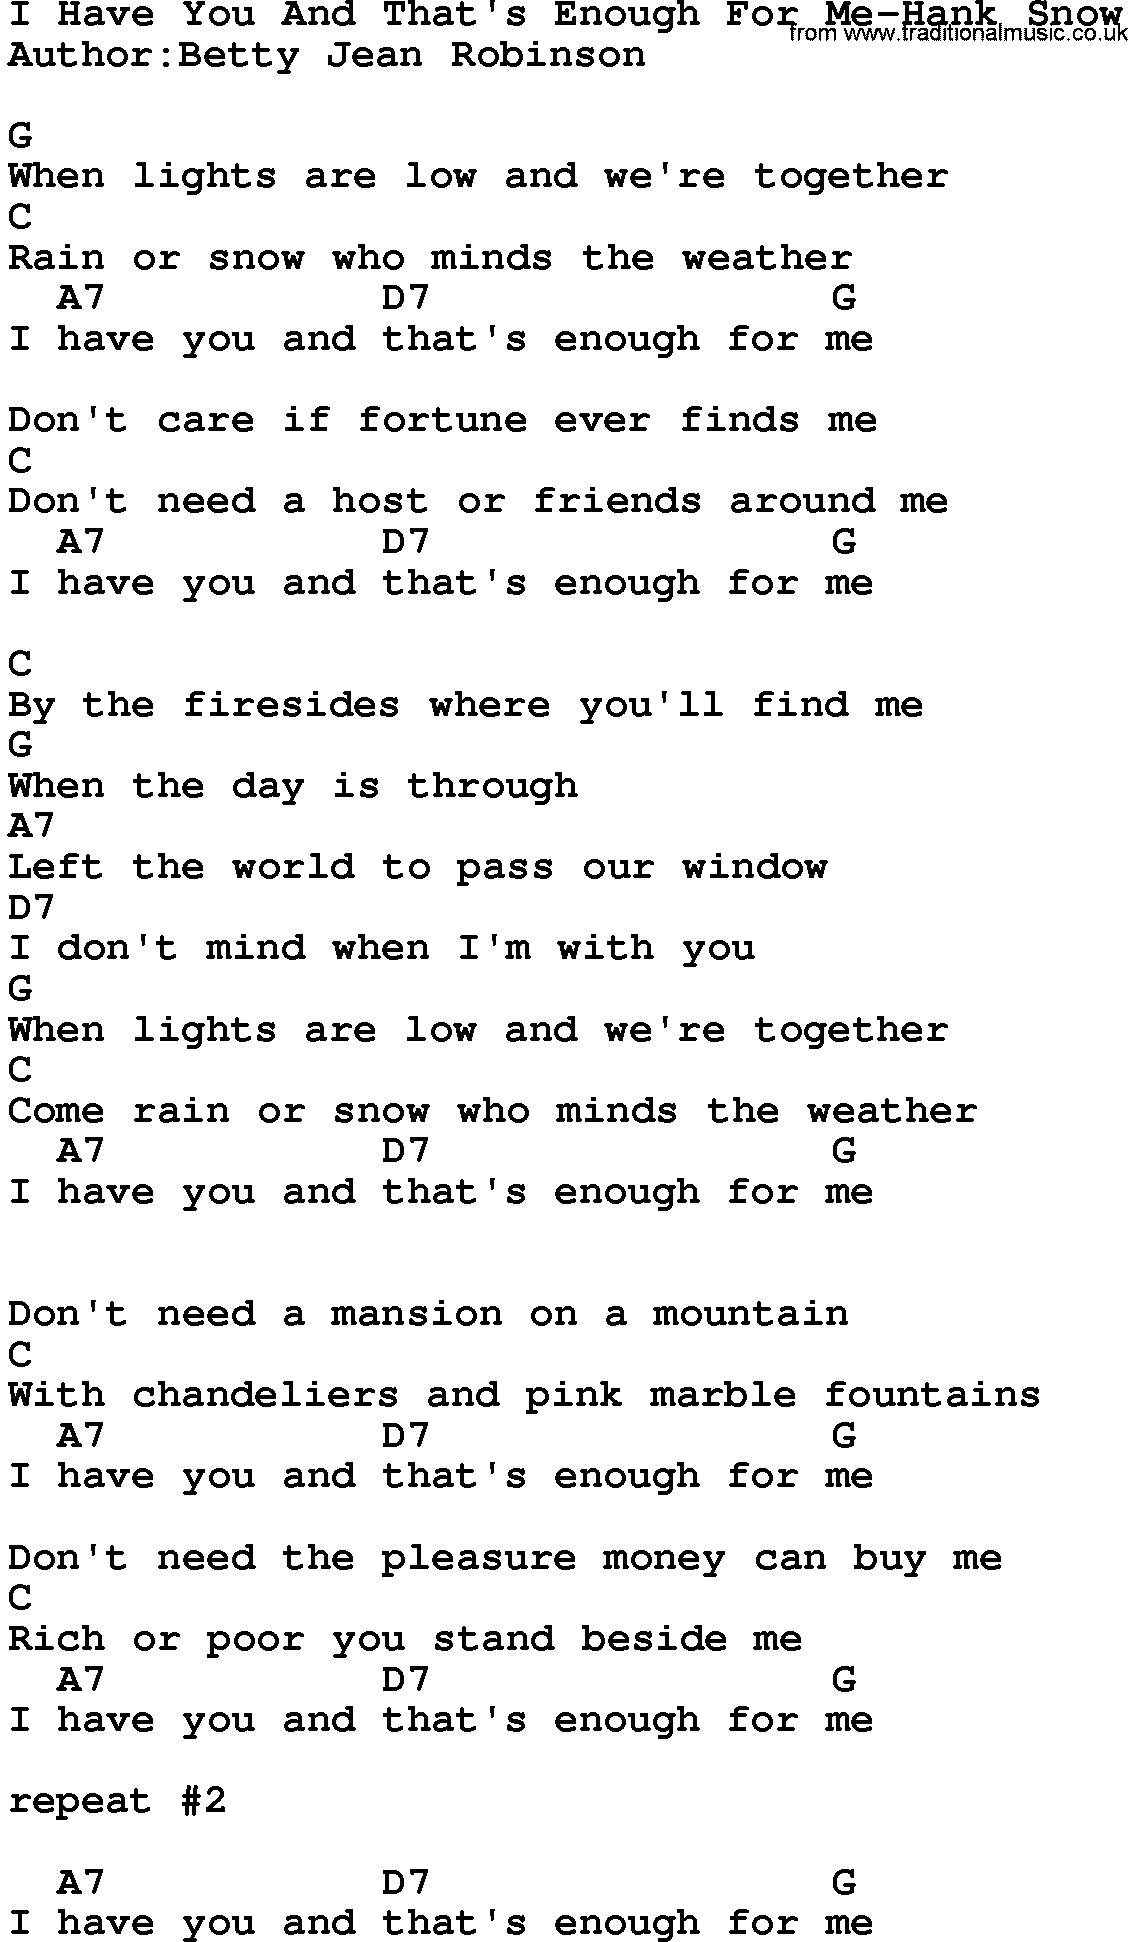 Country music song: I Have You And That's Enough For Me-Hank Snow lyrics and chords